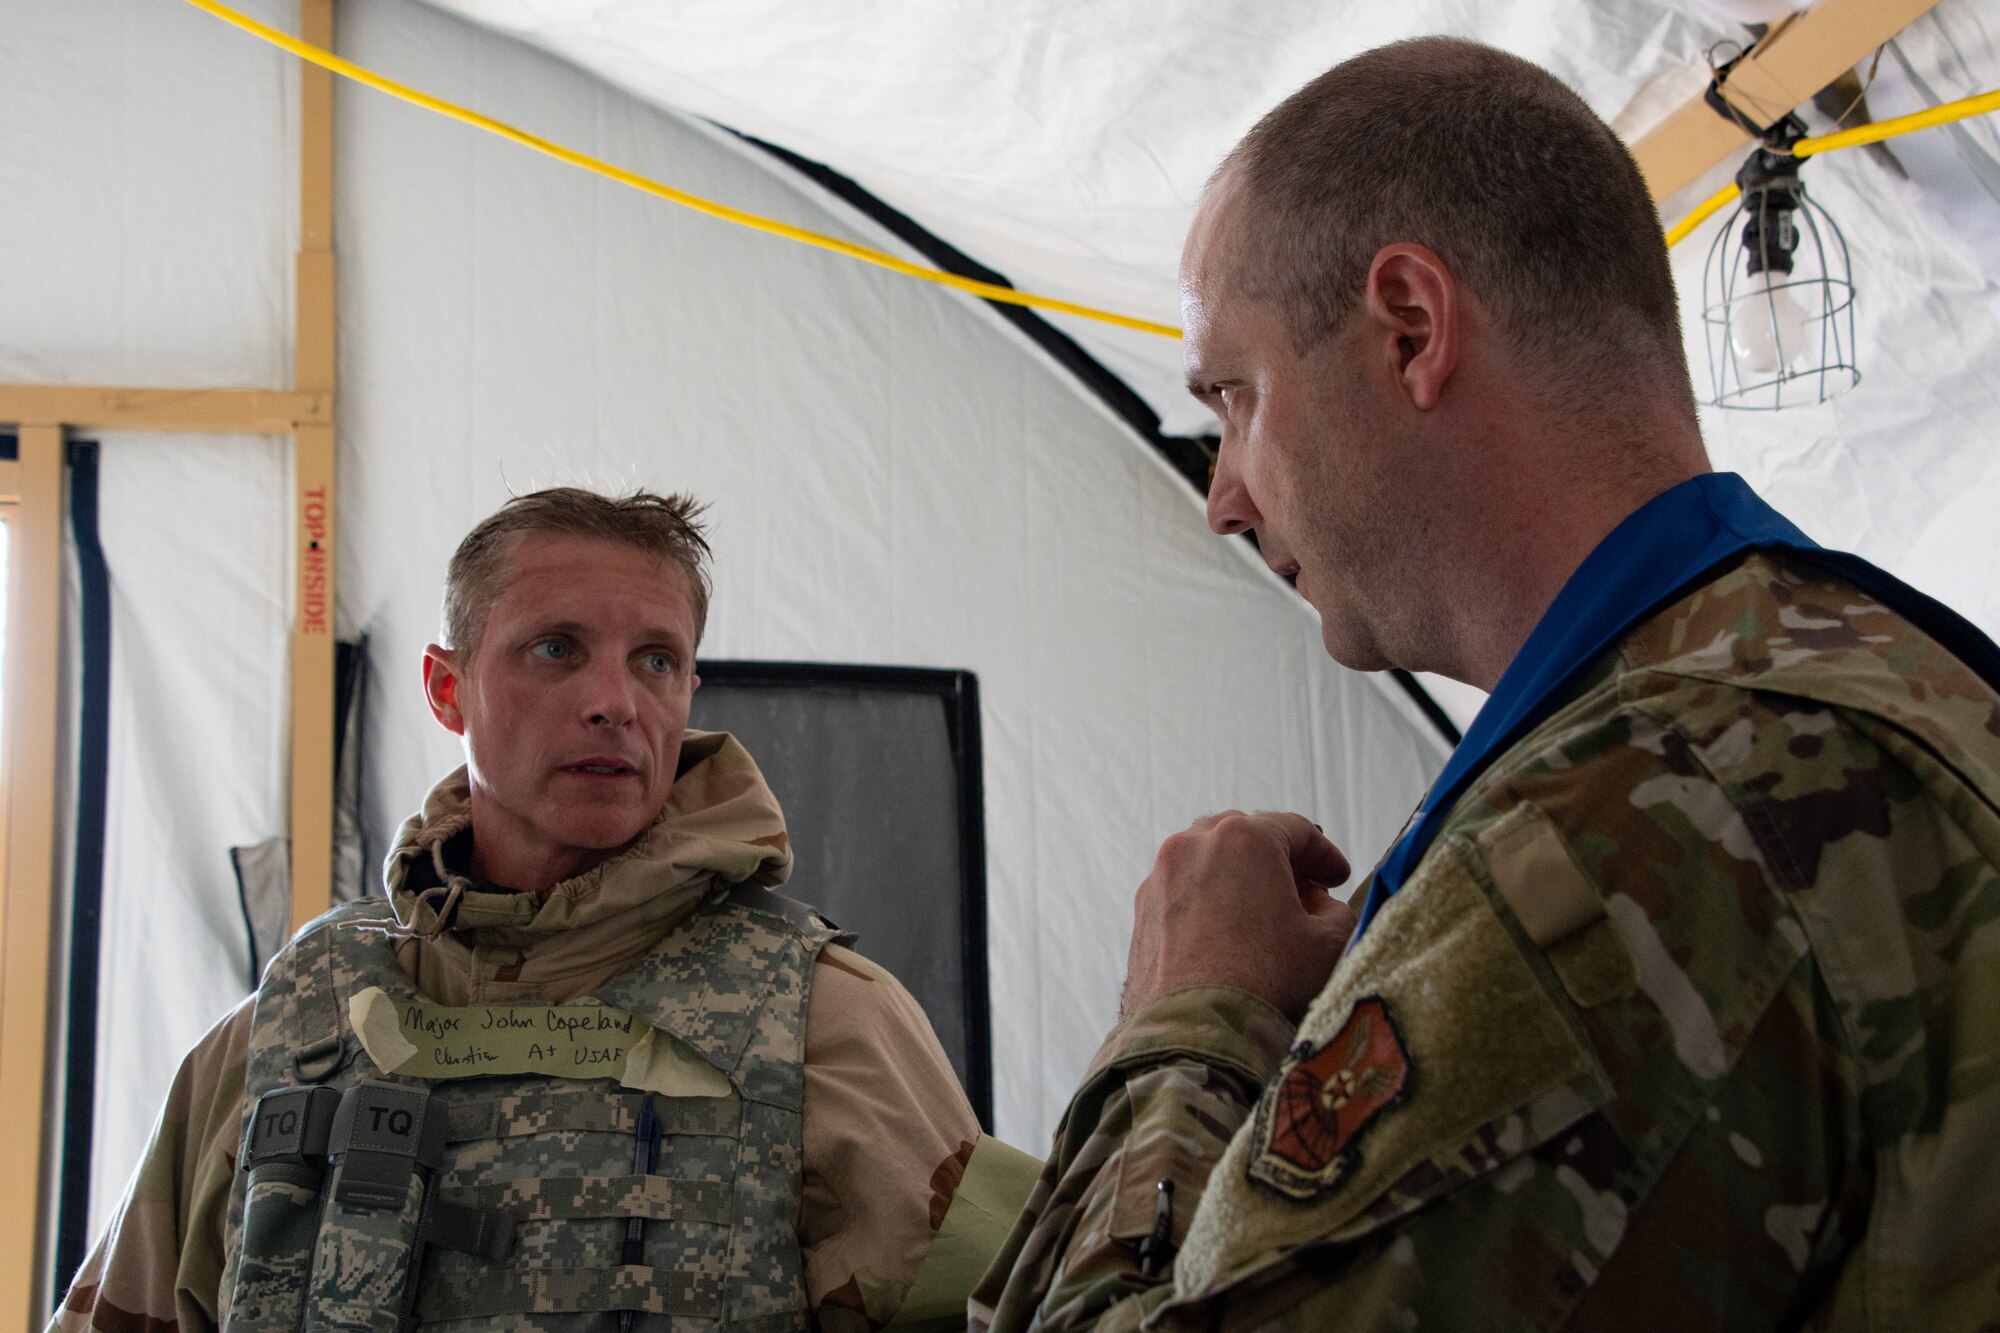 U.S Air Force Maj. John Copeland, 509th Bomb Wing flight medical member, is inspected by Maj. Micha Emerson, Whiteman Air Force Base Wing Inspection Team member, during a Chemical, Biological, Radiological, Nuclear exercise at Whiteman Air Force Base, Missouri, Sept. 14, 2022. Whiteman’s WIT are experts in their career fields and provide exercise participants with constructive feedback for Airmen to improve mission capabilities. (U.S. Air National Guard photo by Airman 1st Class Phoenix Lietch)